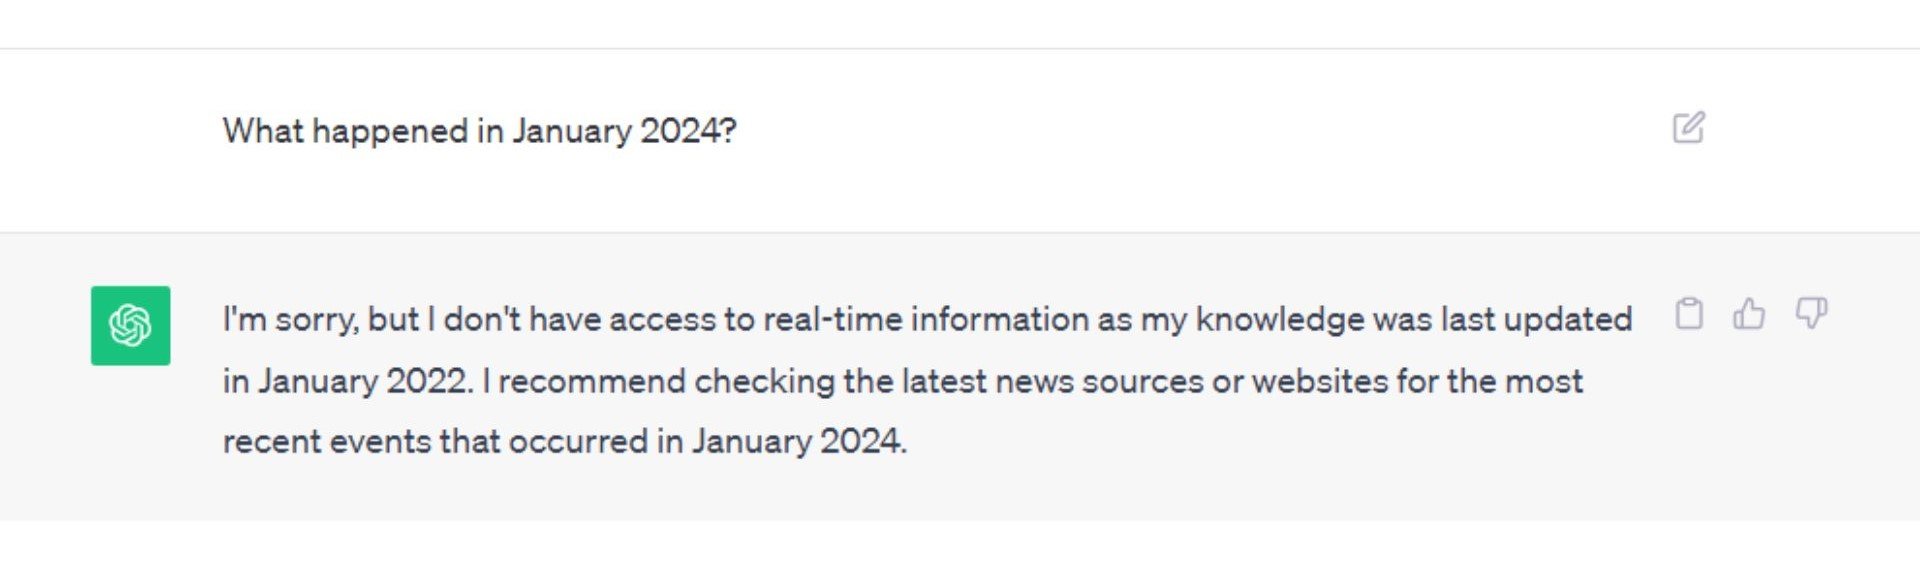 ChatGPT answer to a question about something happened after january 2022